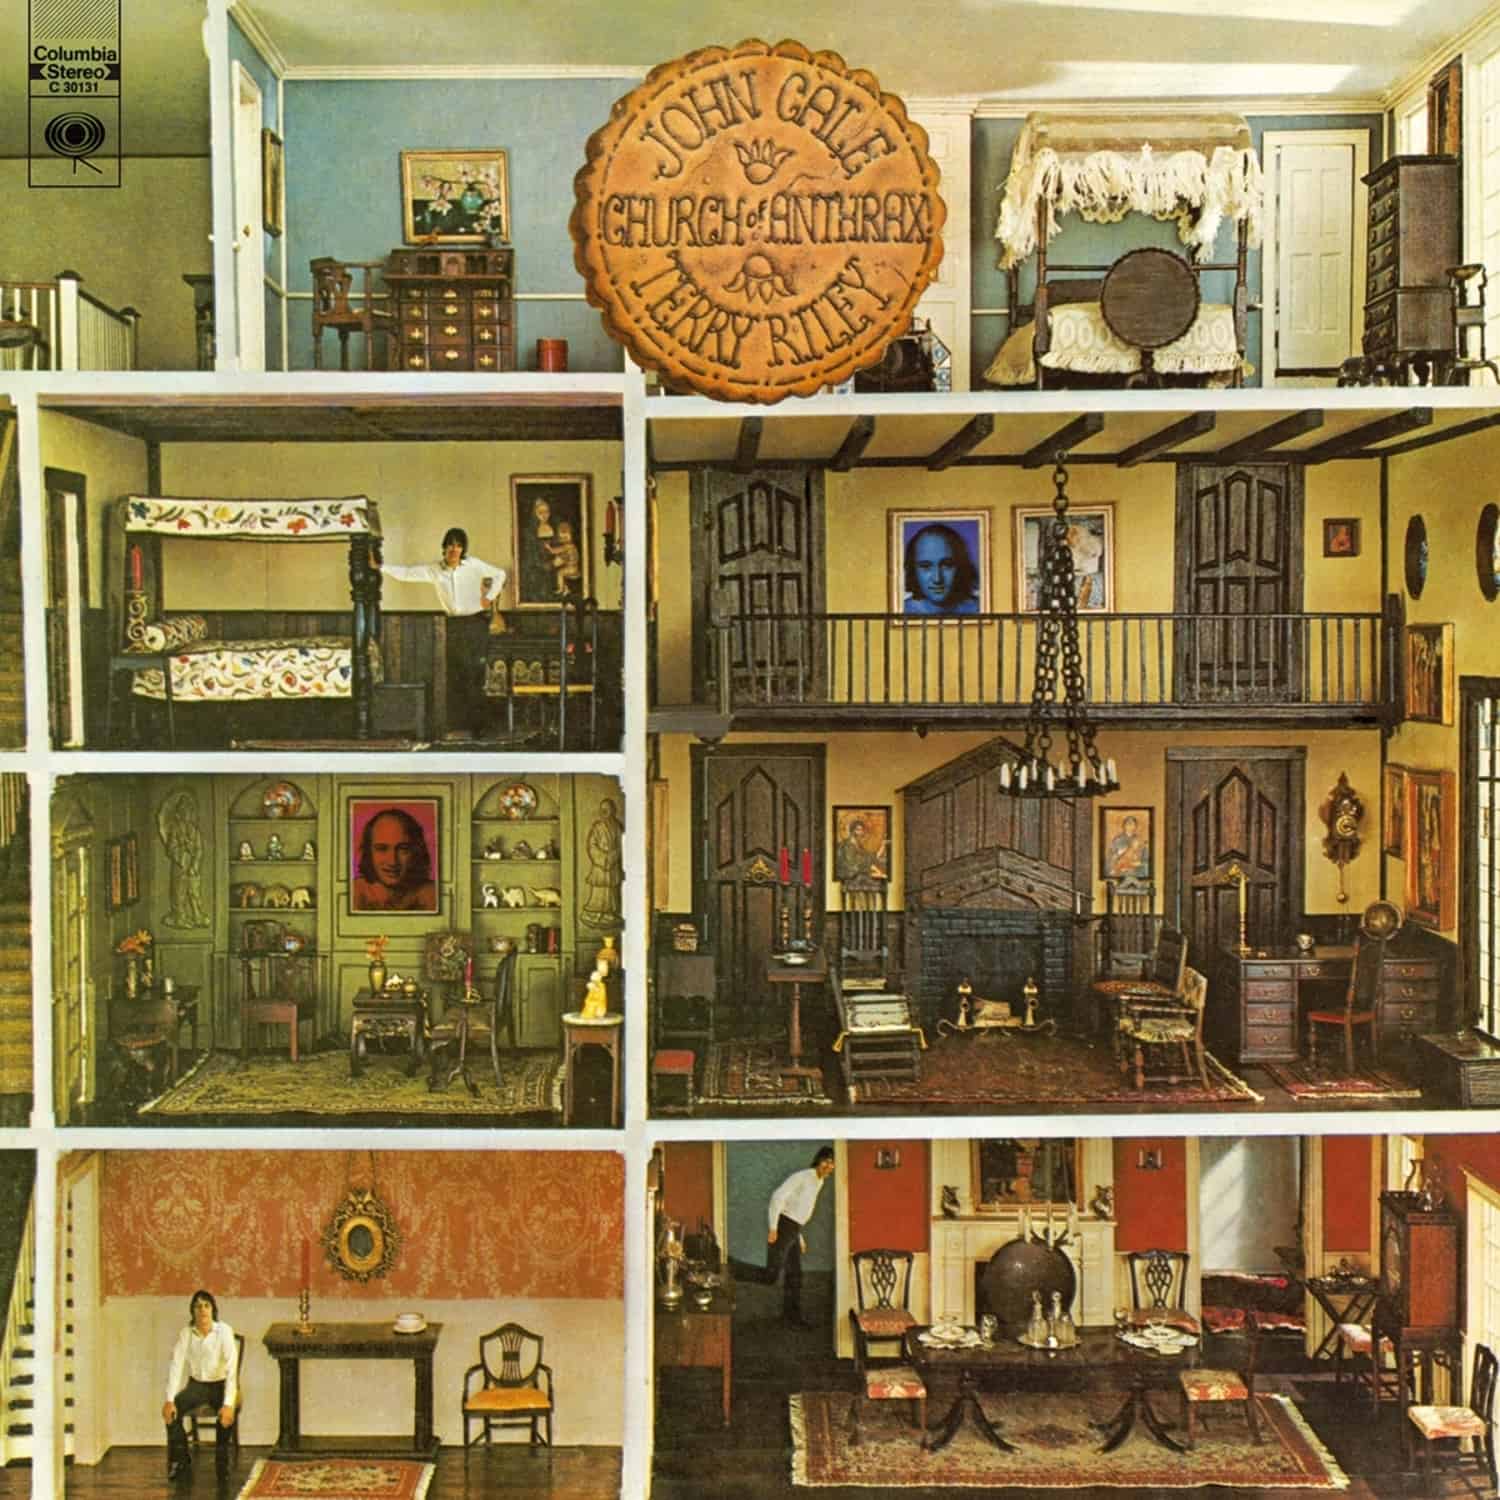 John Cale & Terry Riley - CHURCH OF ANTHRAX 